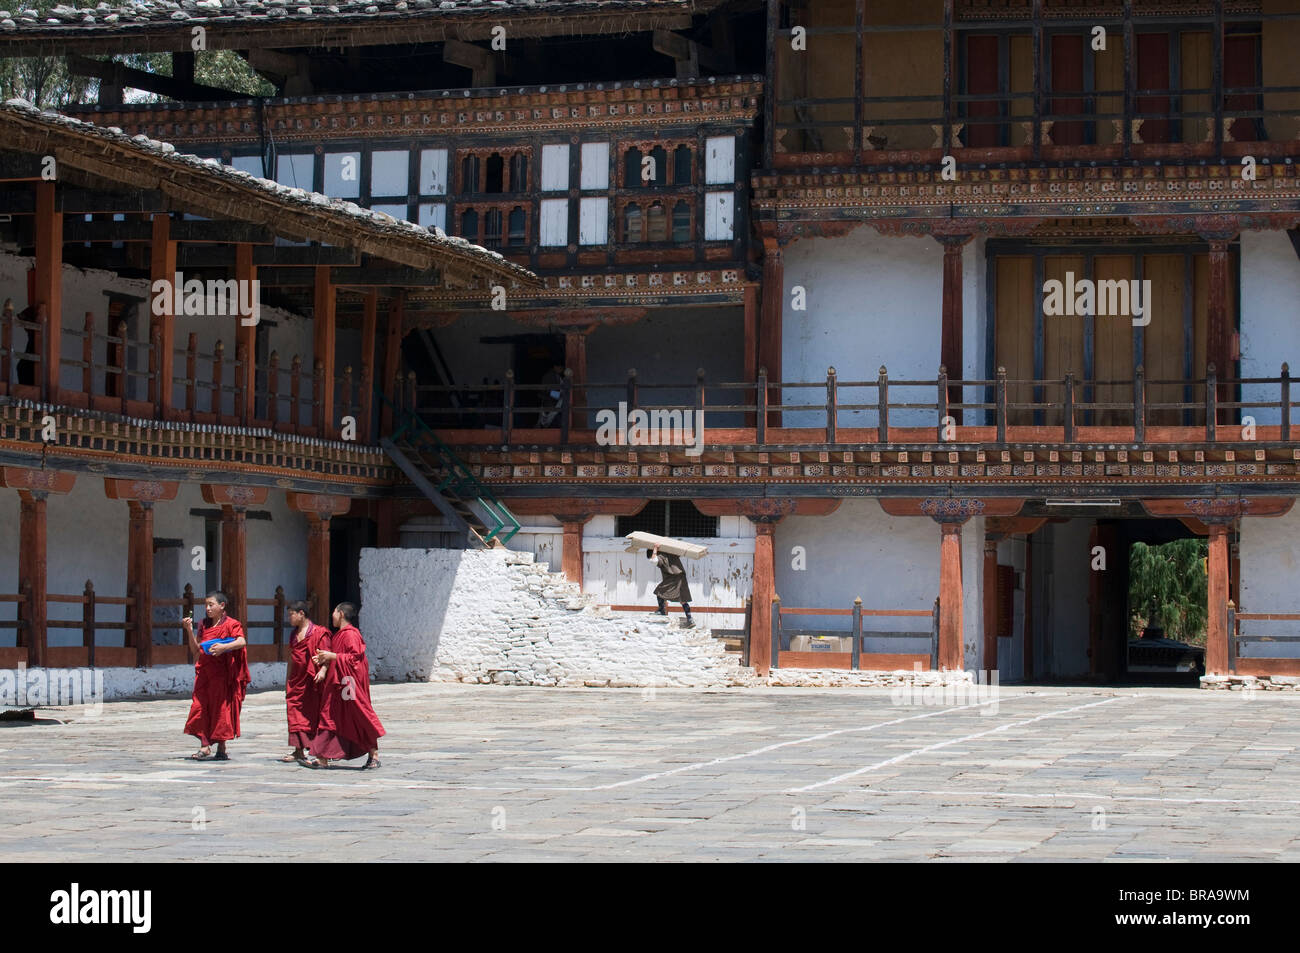 Monks walking in the court of the old Wangdue monastery, Bhutan, Asia Stock Photo